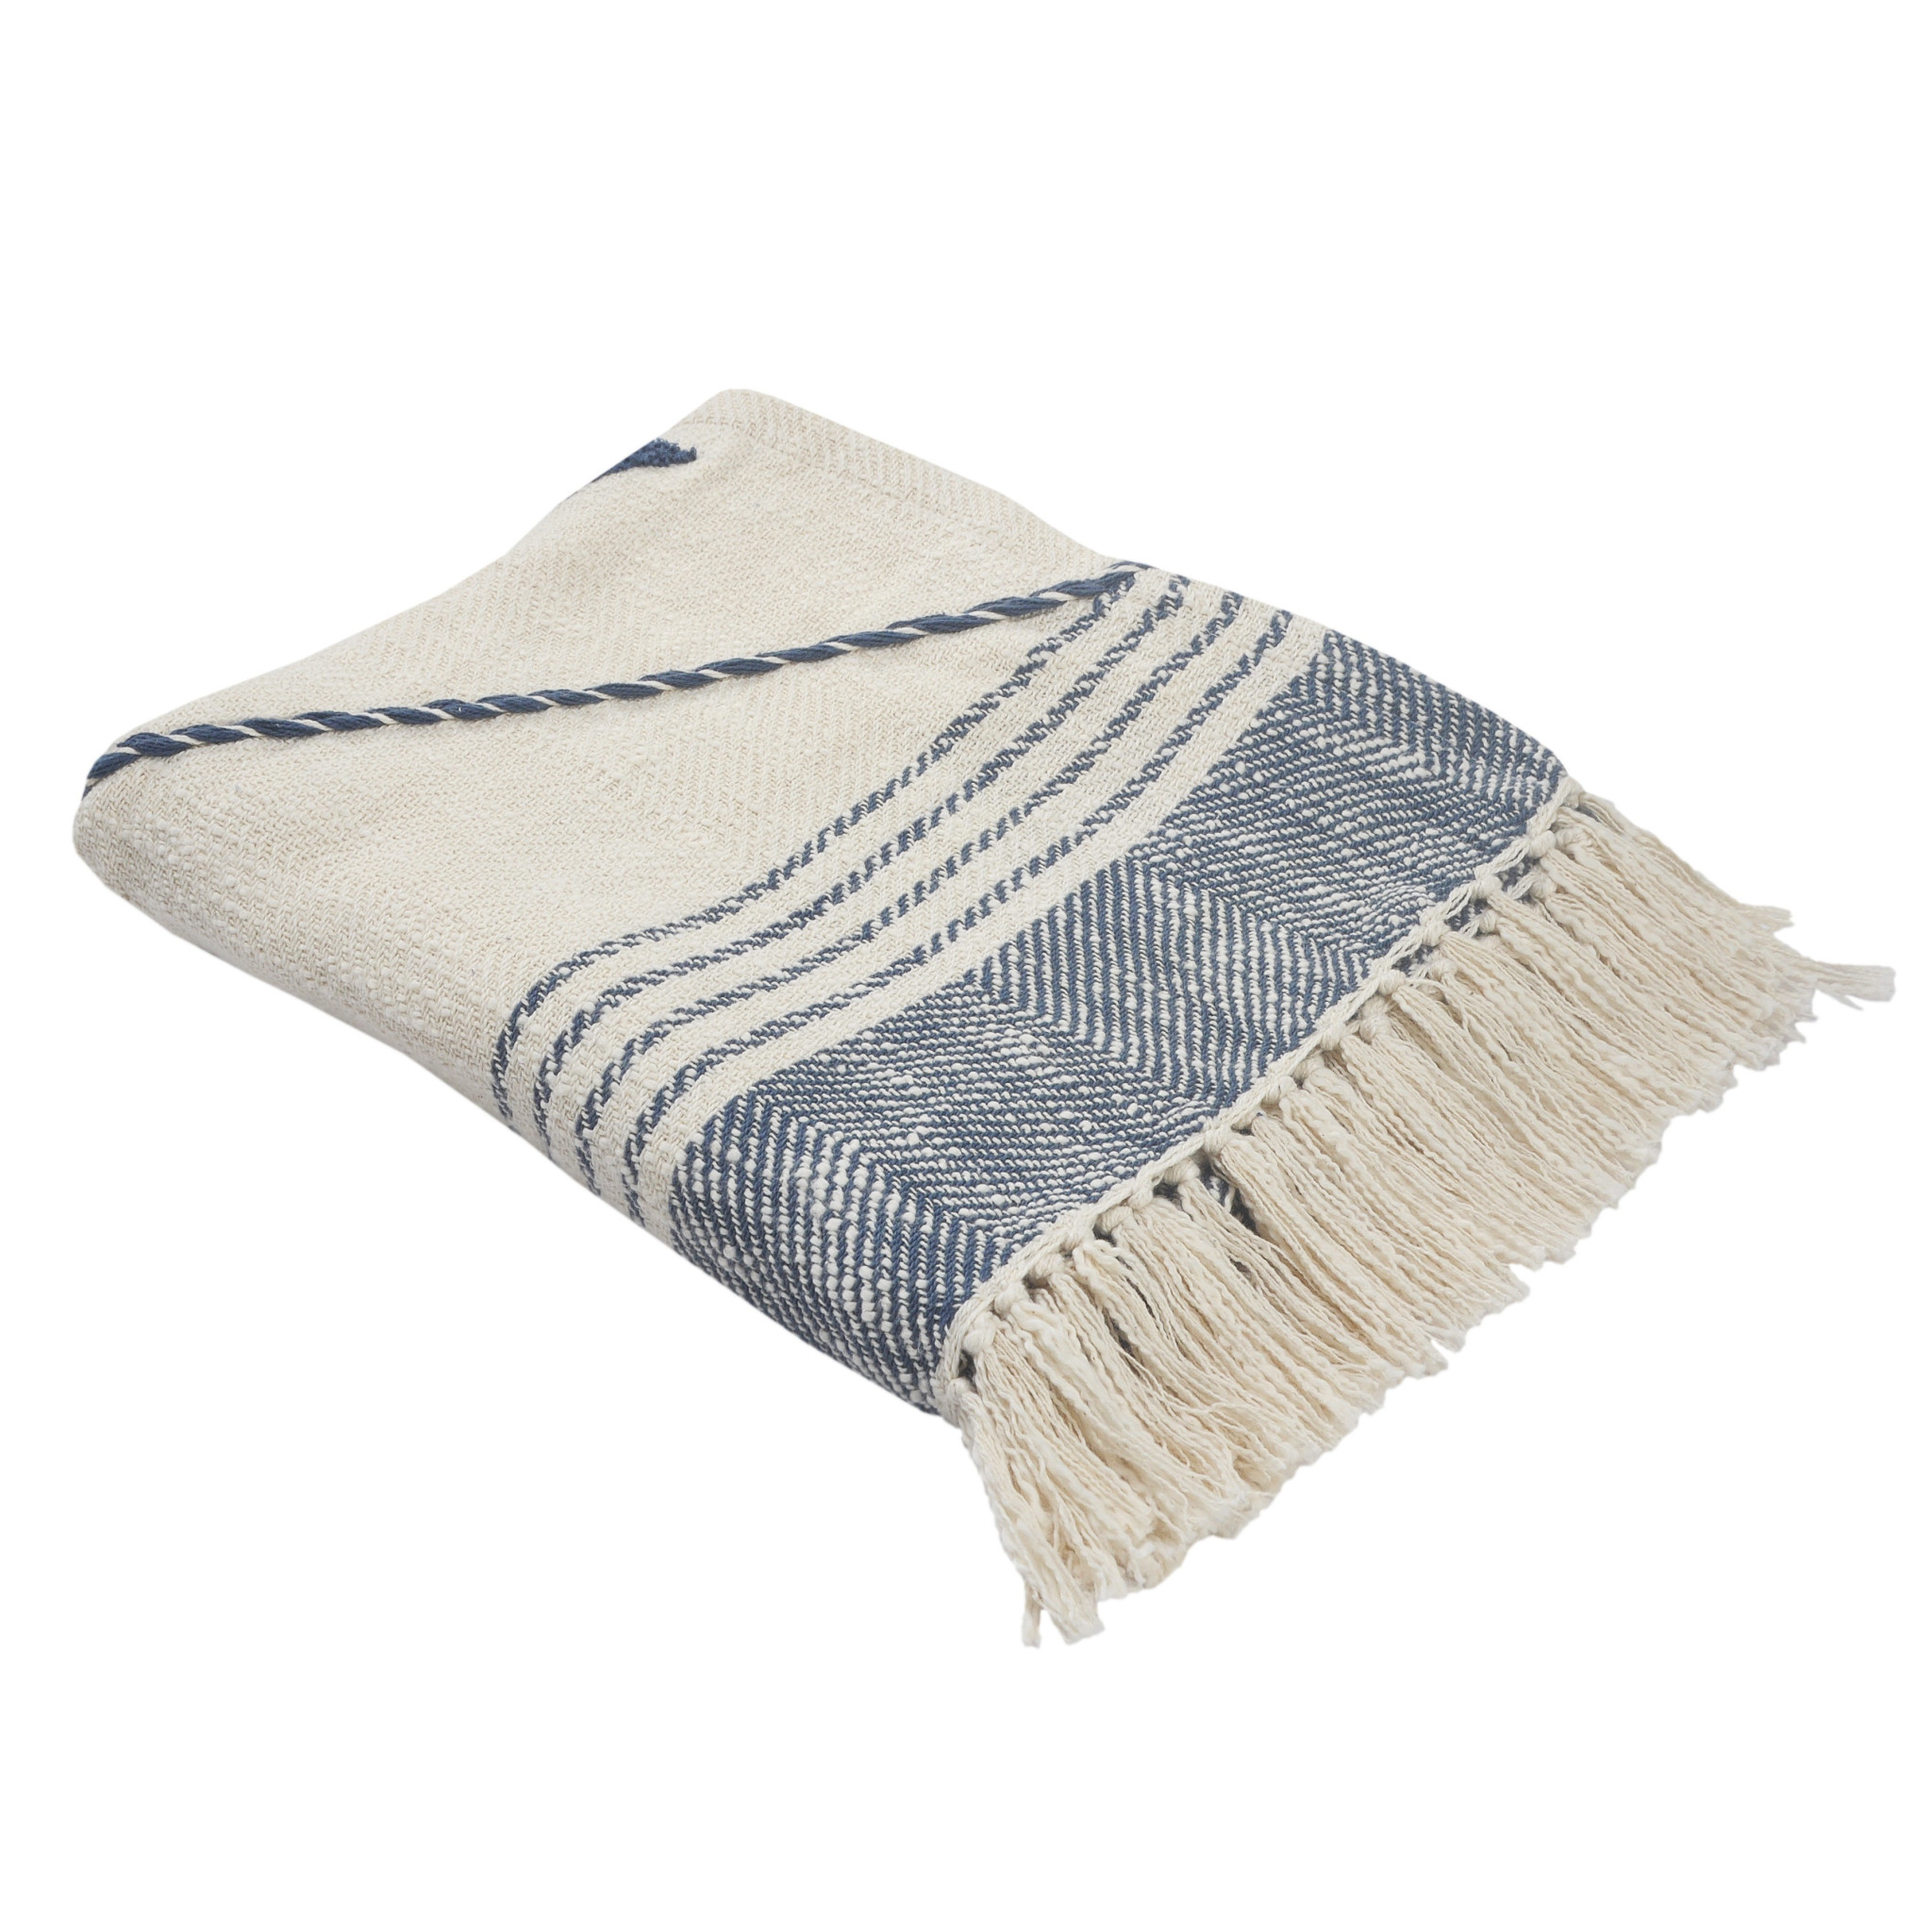 Blue and Off White Woven Cotton Striped Throw Blanket-516482-1